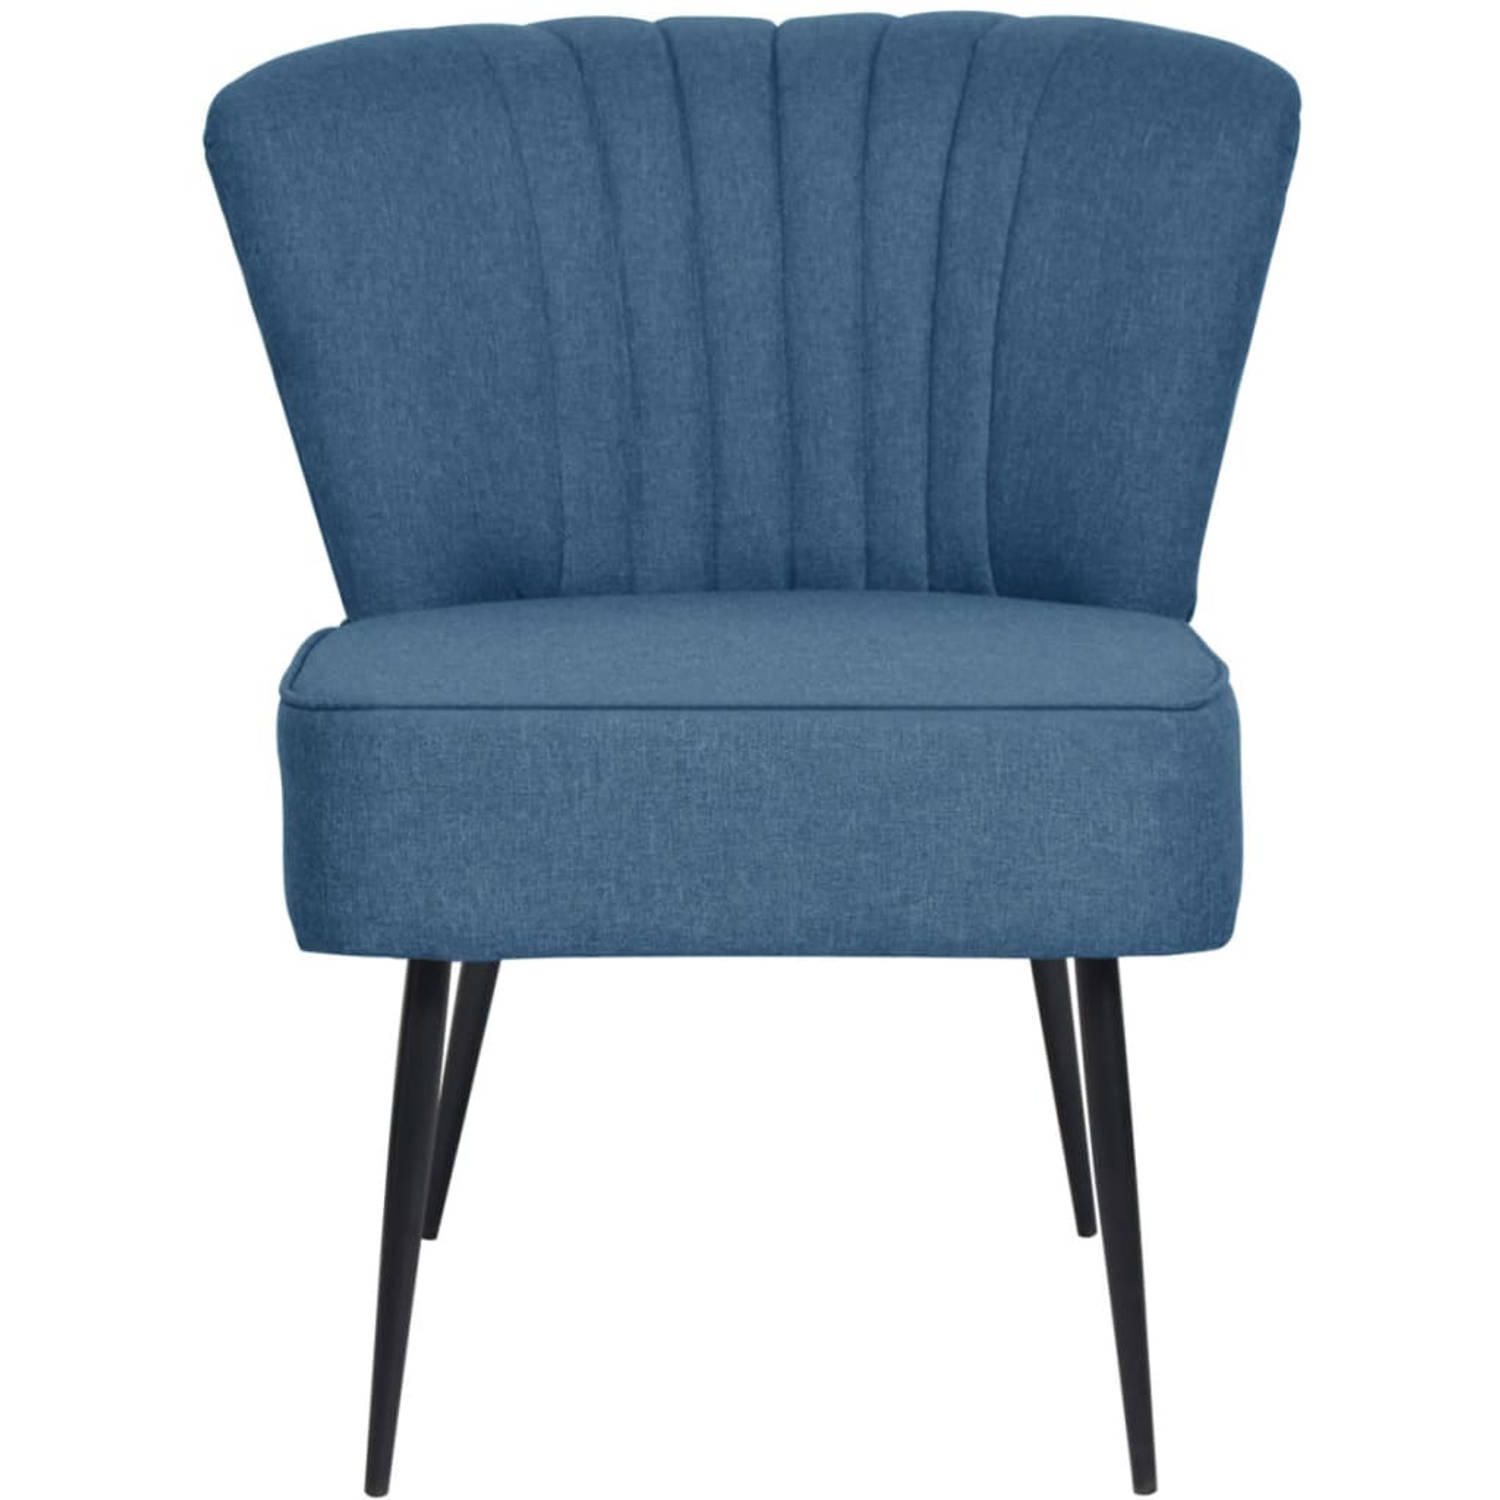 The Living Store Cocktailstoel stof blauw - Fauteuil